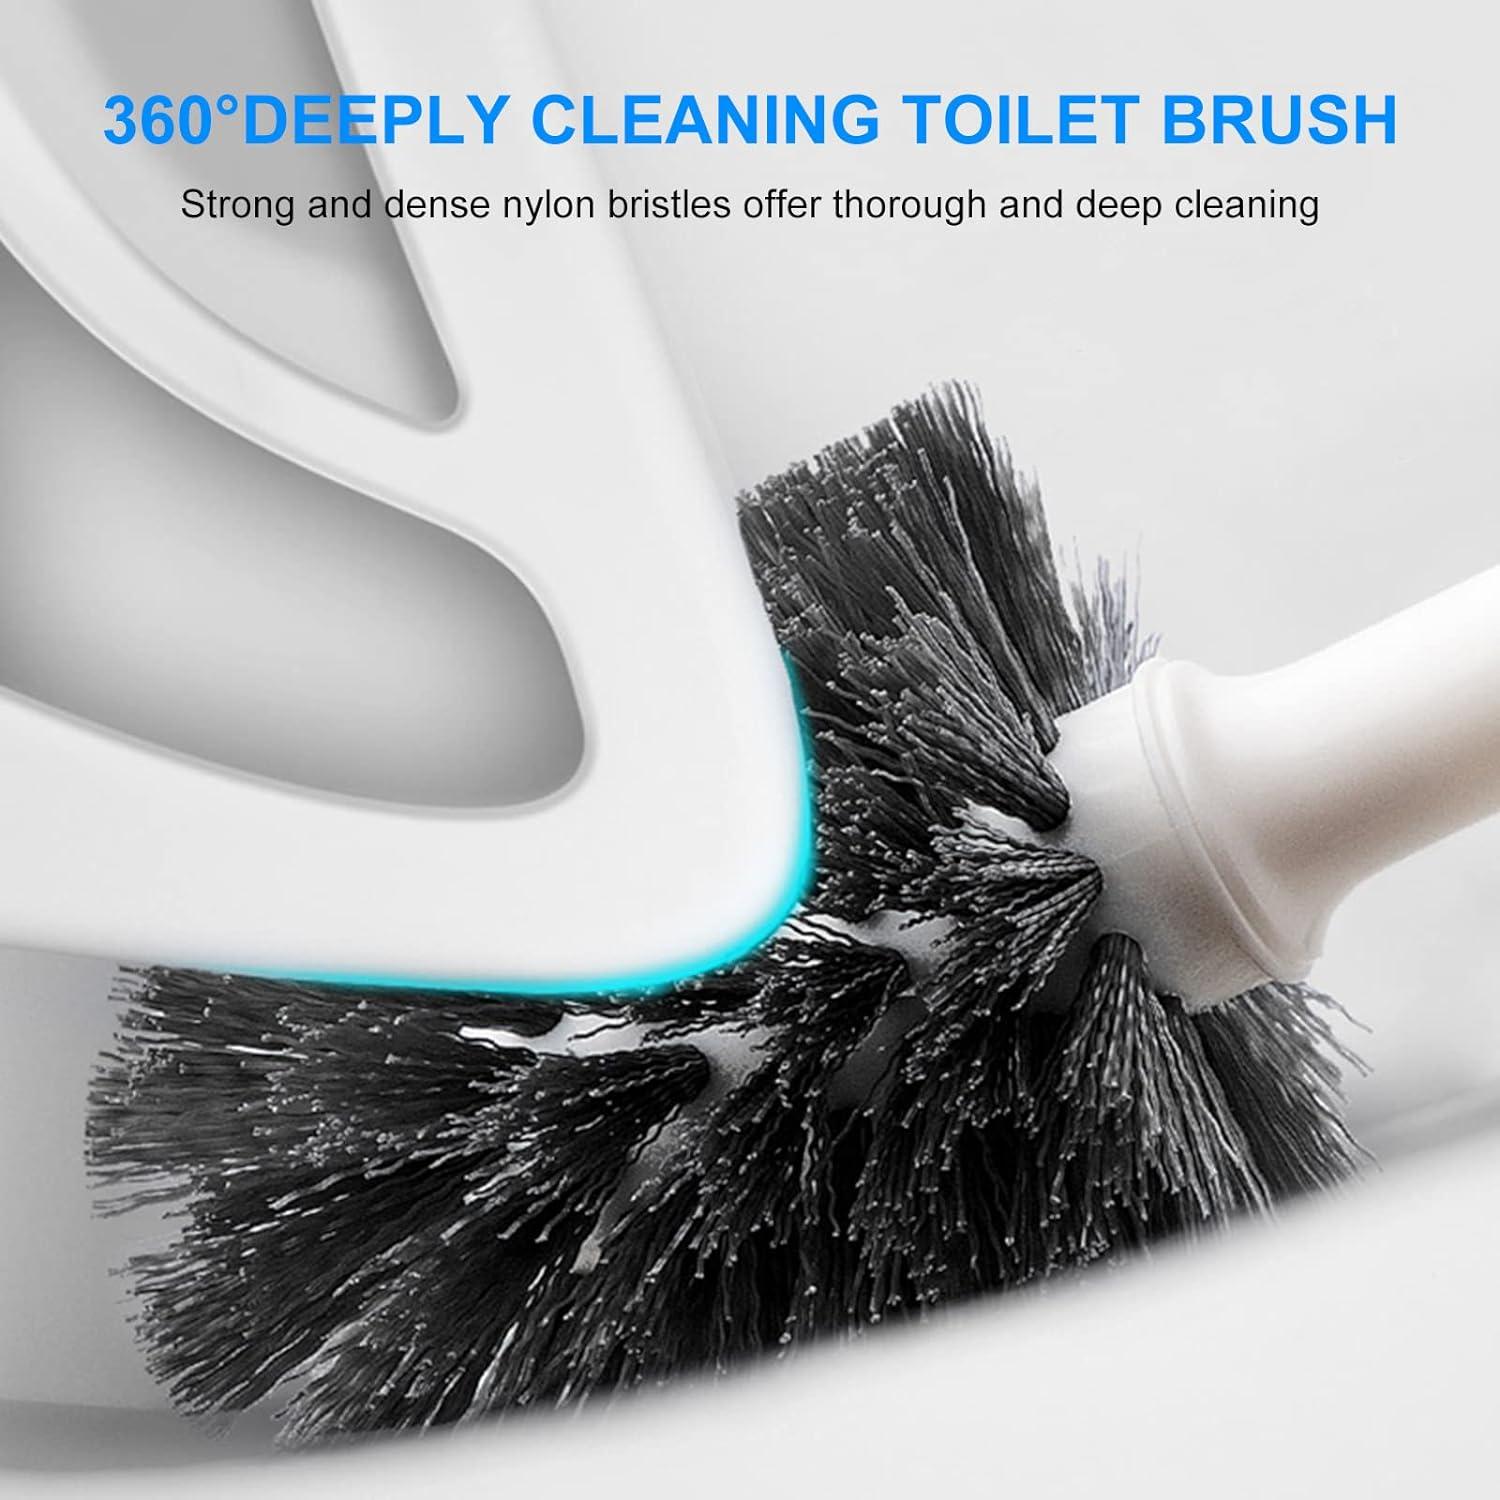 Grout Brush Nylon Bristles -  - Restroom-Products -  Urinal-and-Bowl-Care - Bowl-Brushes-and-Plungers 